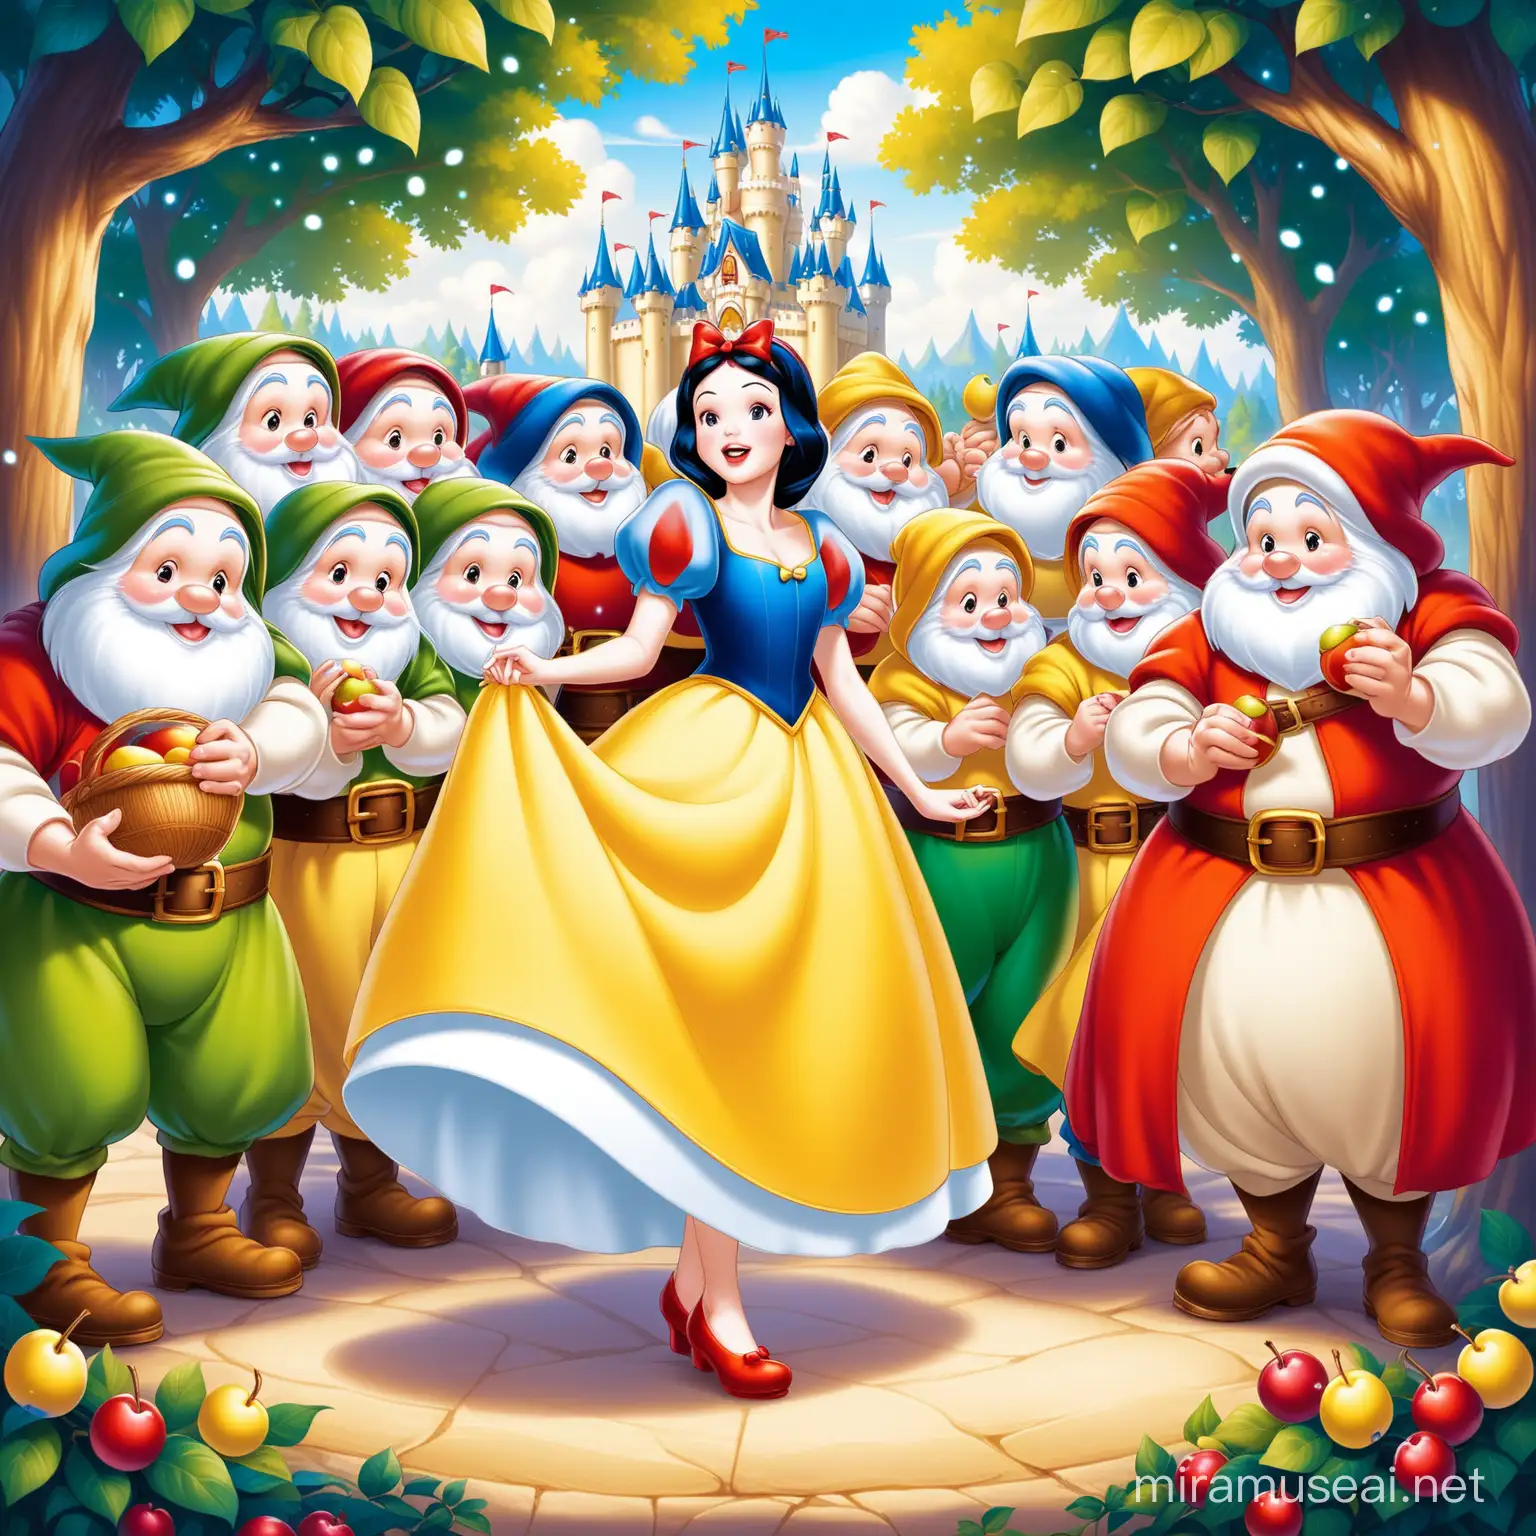 snow white and the seven dwarfs